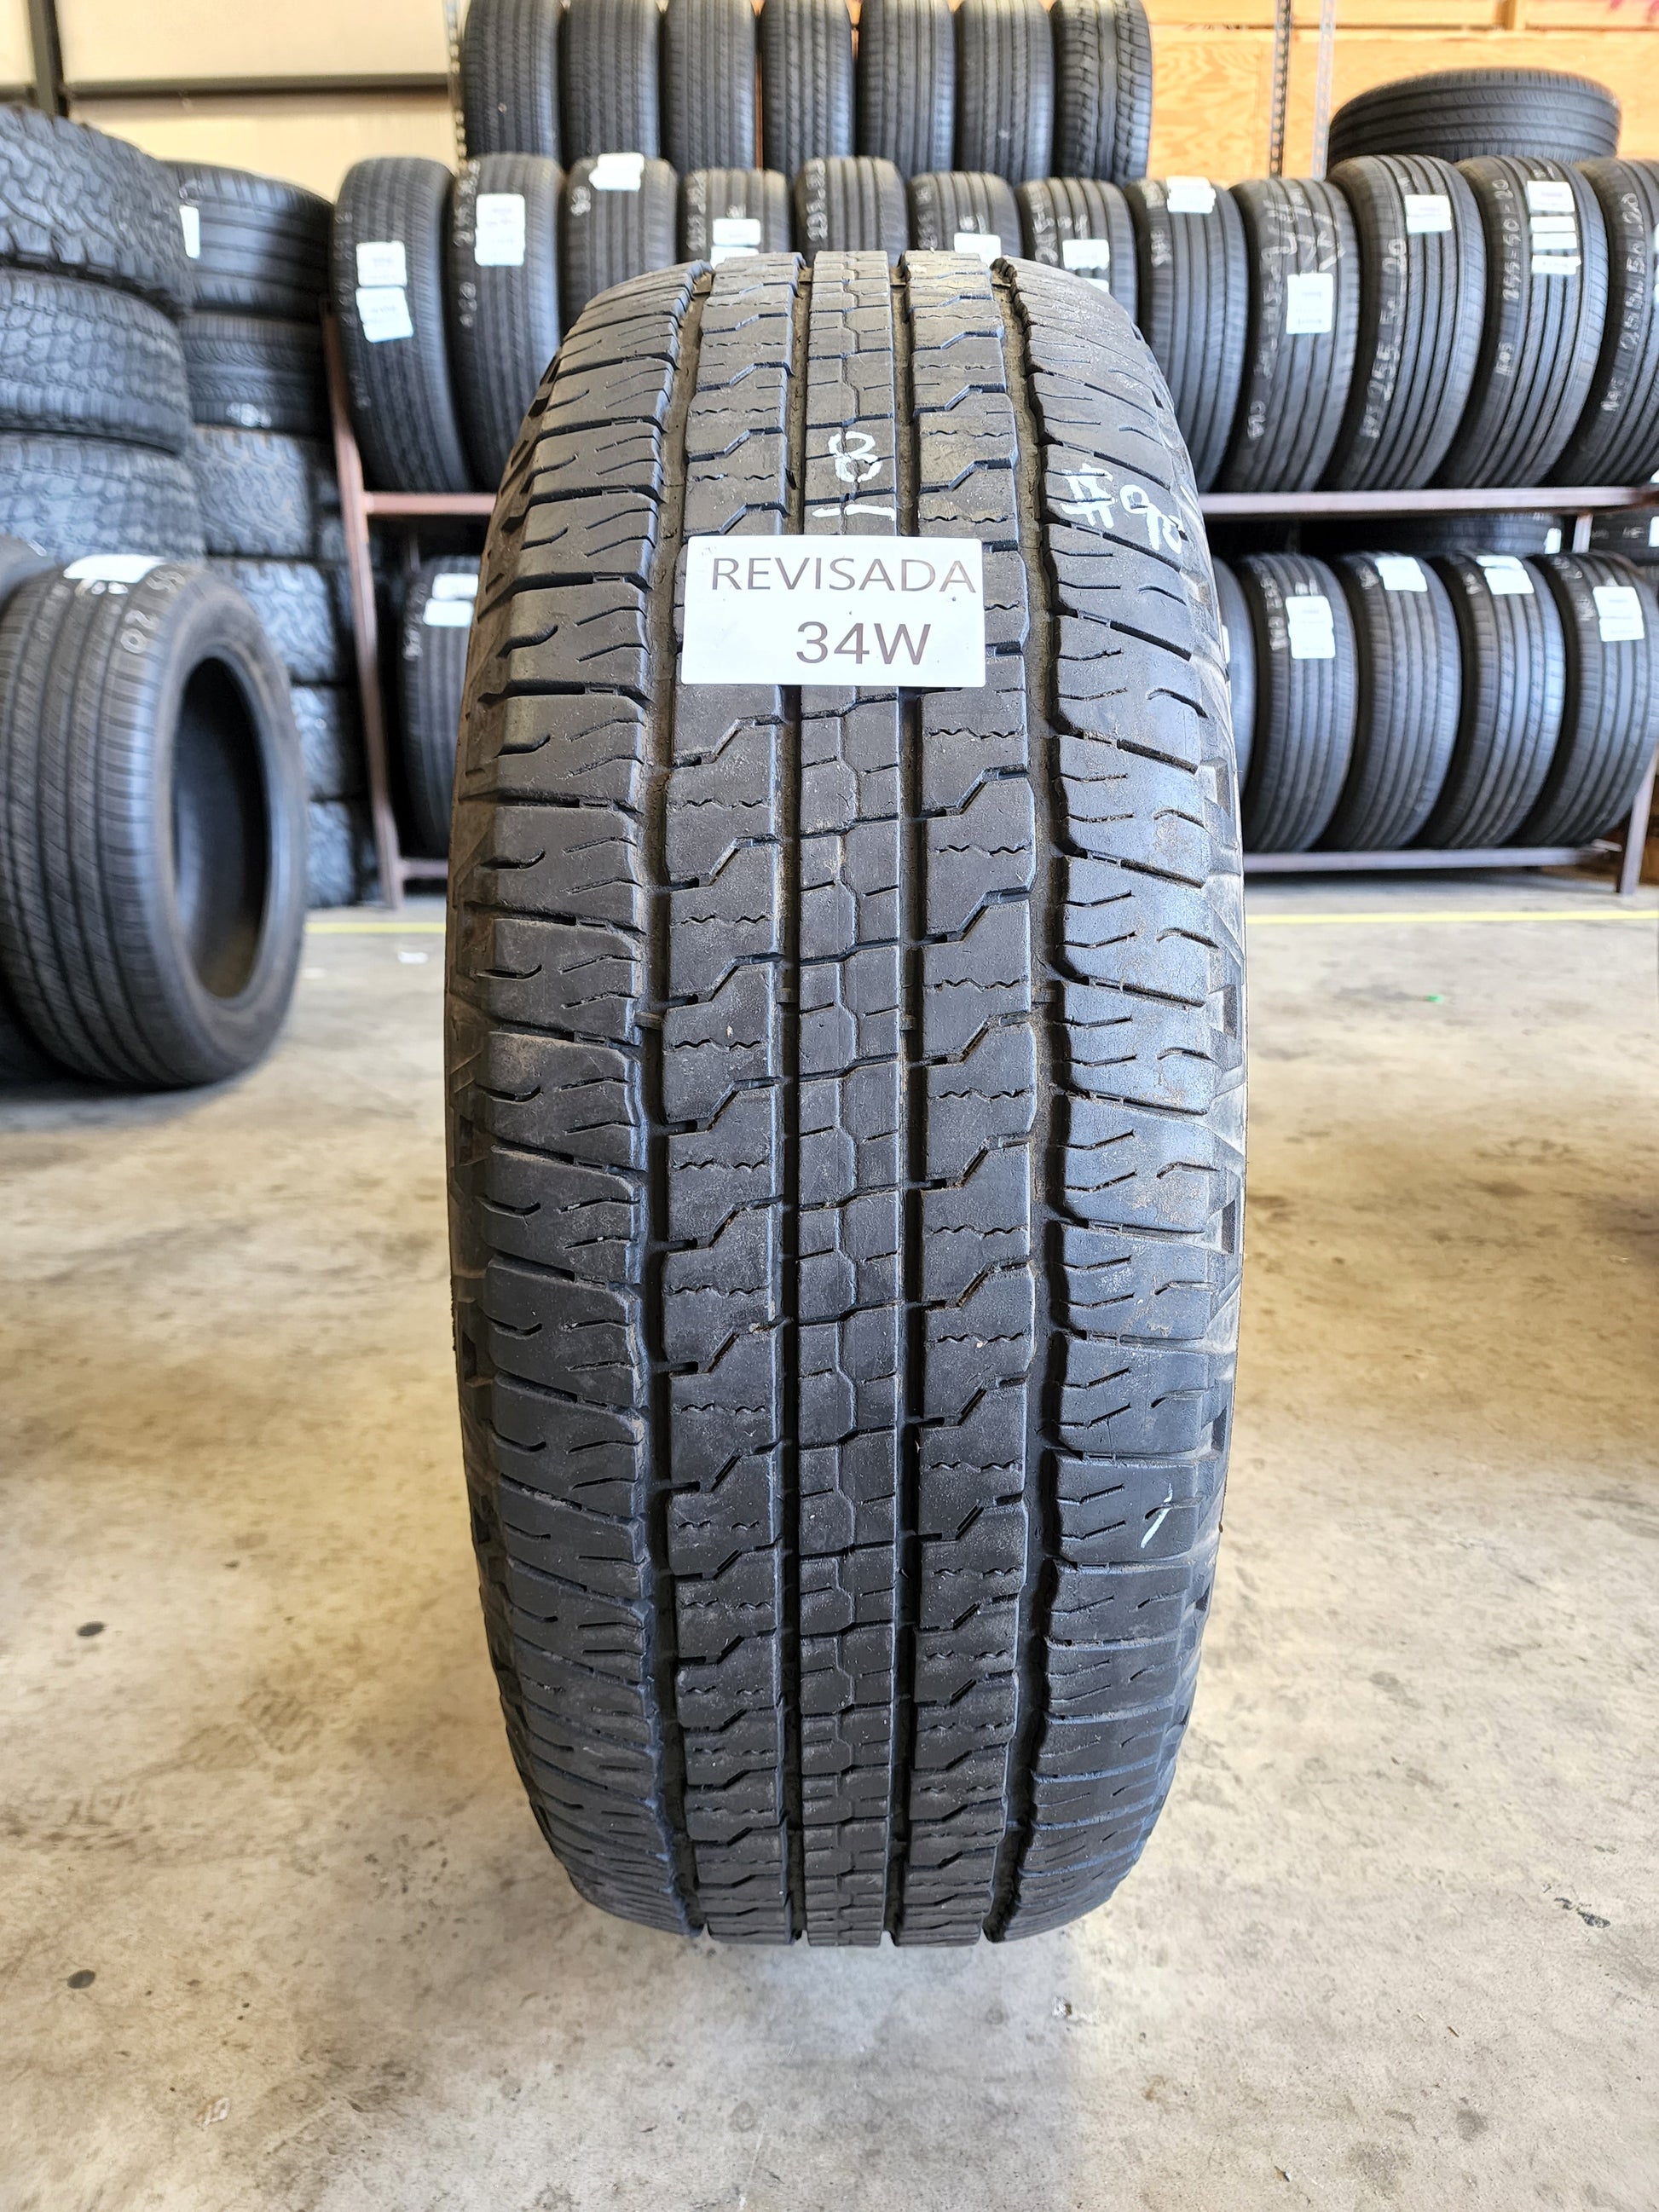 SINGLE 265/65R18 Goodyear Wrangler Fortitude HT 114 T SL - Used Tires